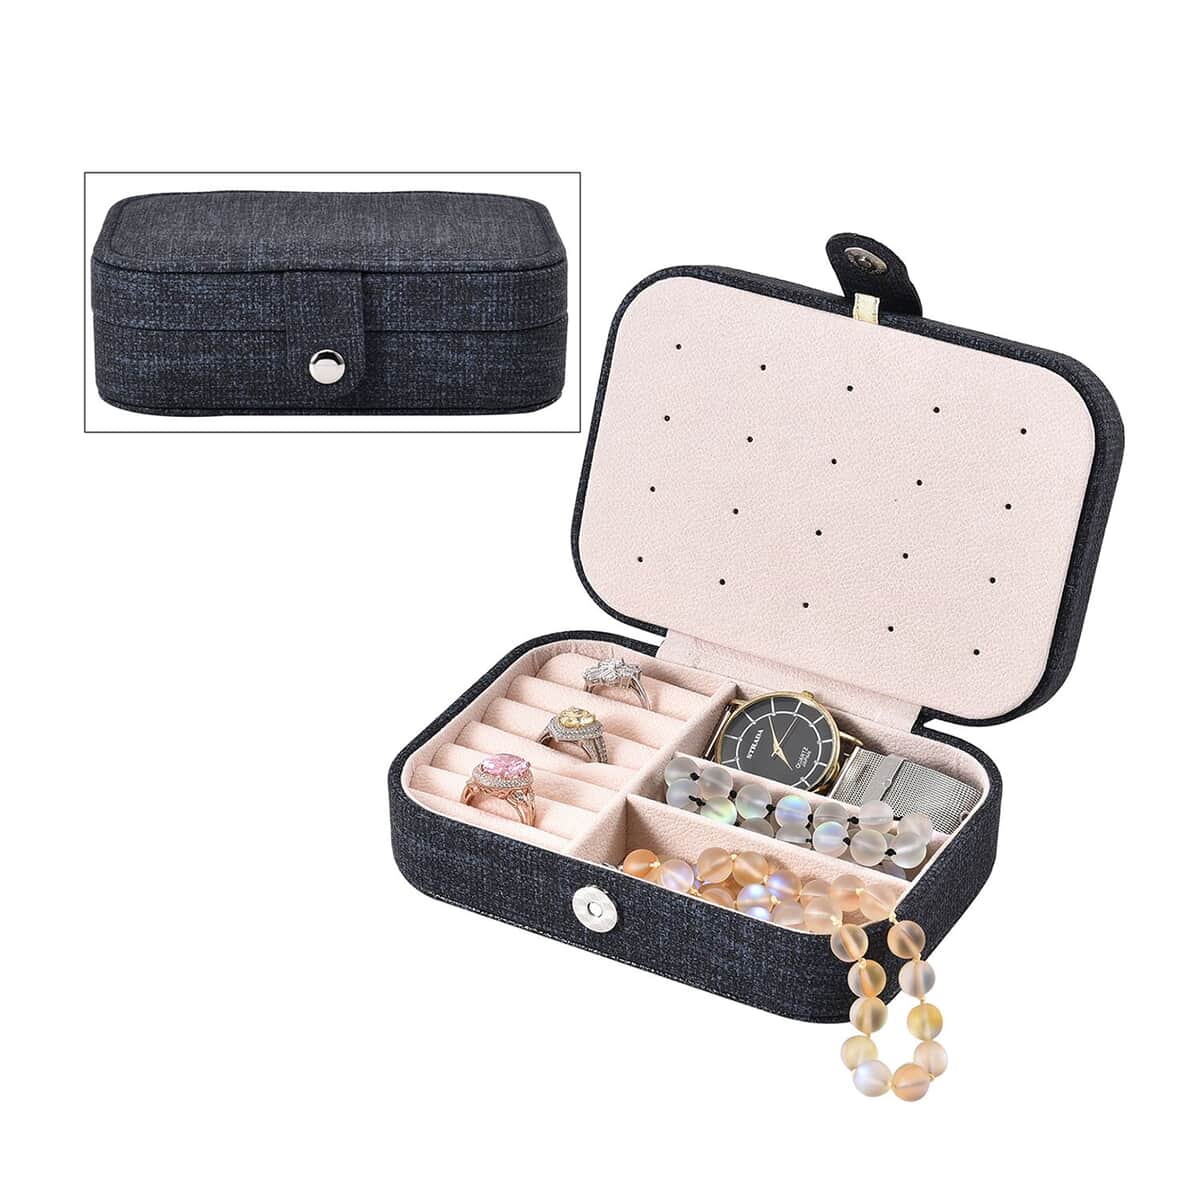 Dark Blue Woven Texture Faux Leather Jewelry Organizer with Button Closure (6.3"x4.5"x2.2") image number 0